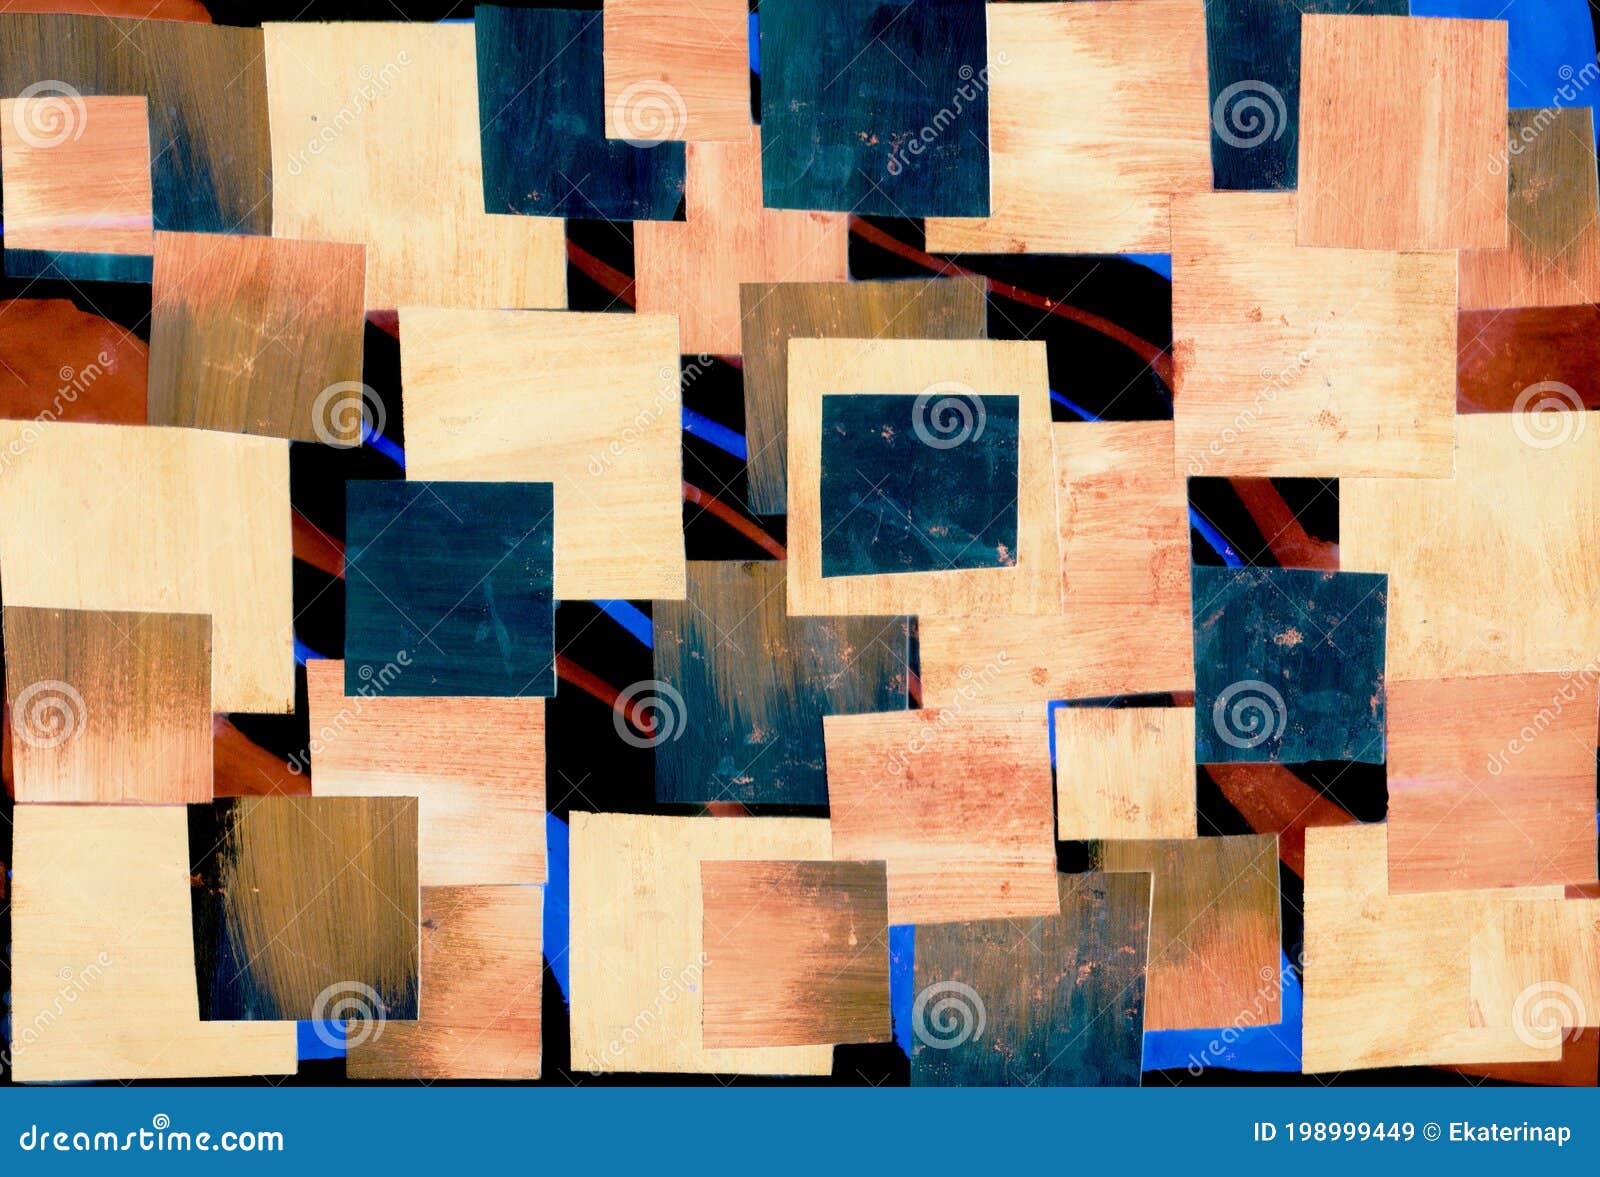 Abstract image of rhombuses Oil collage on canvas